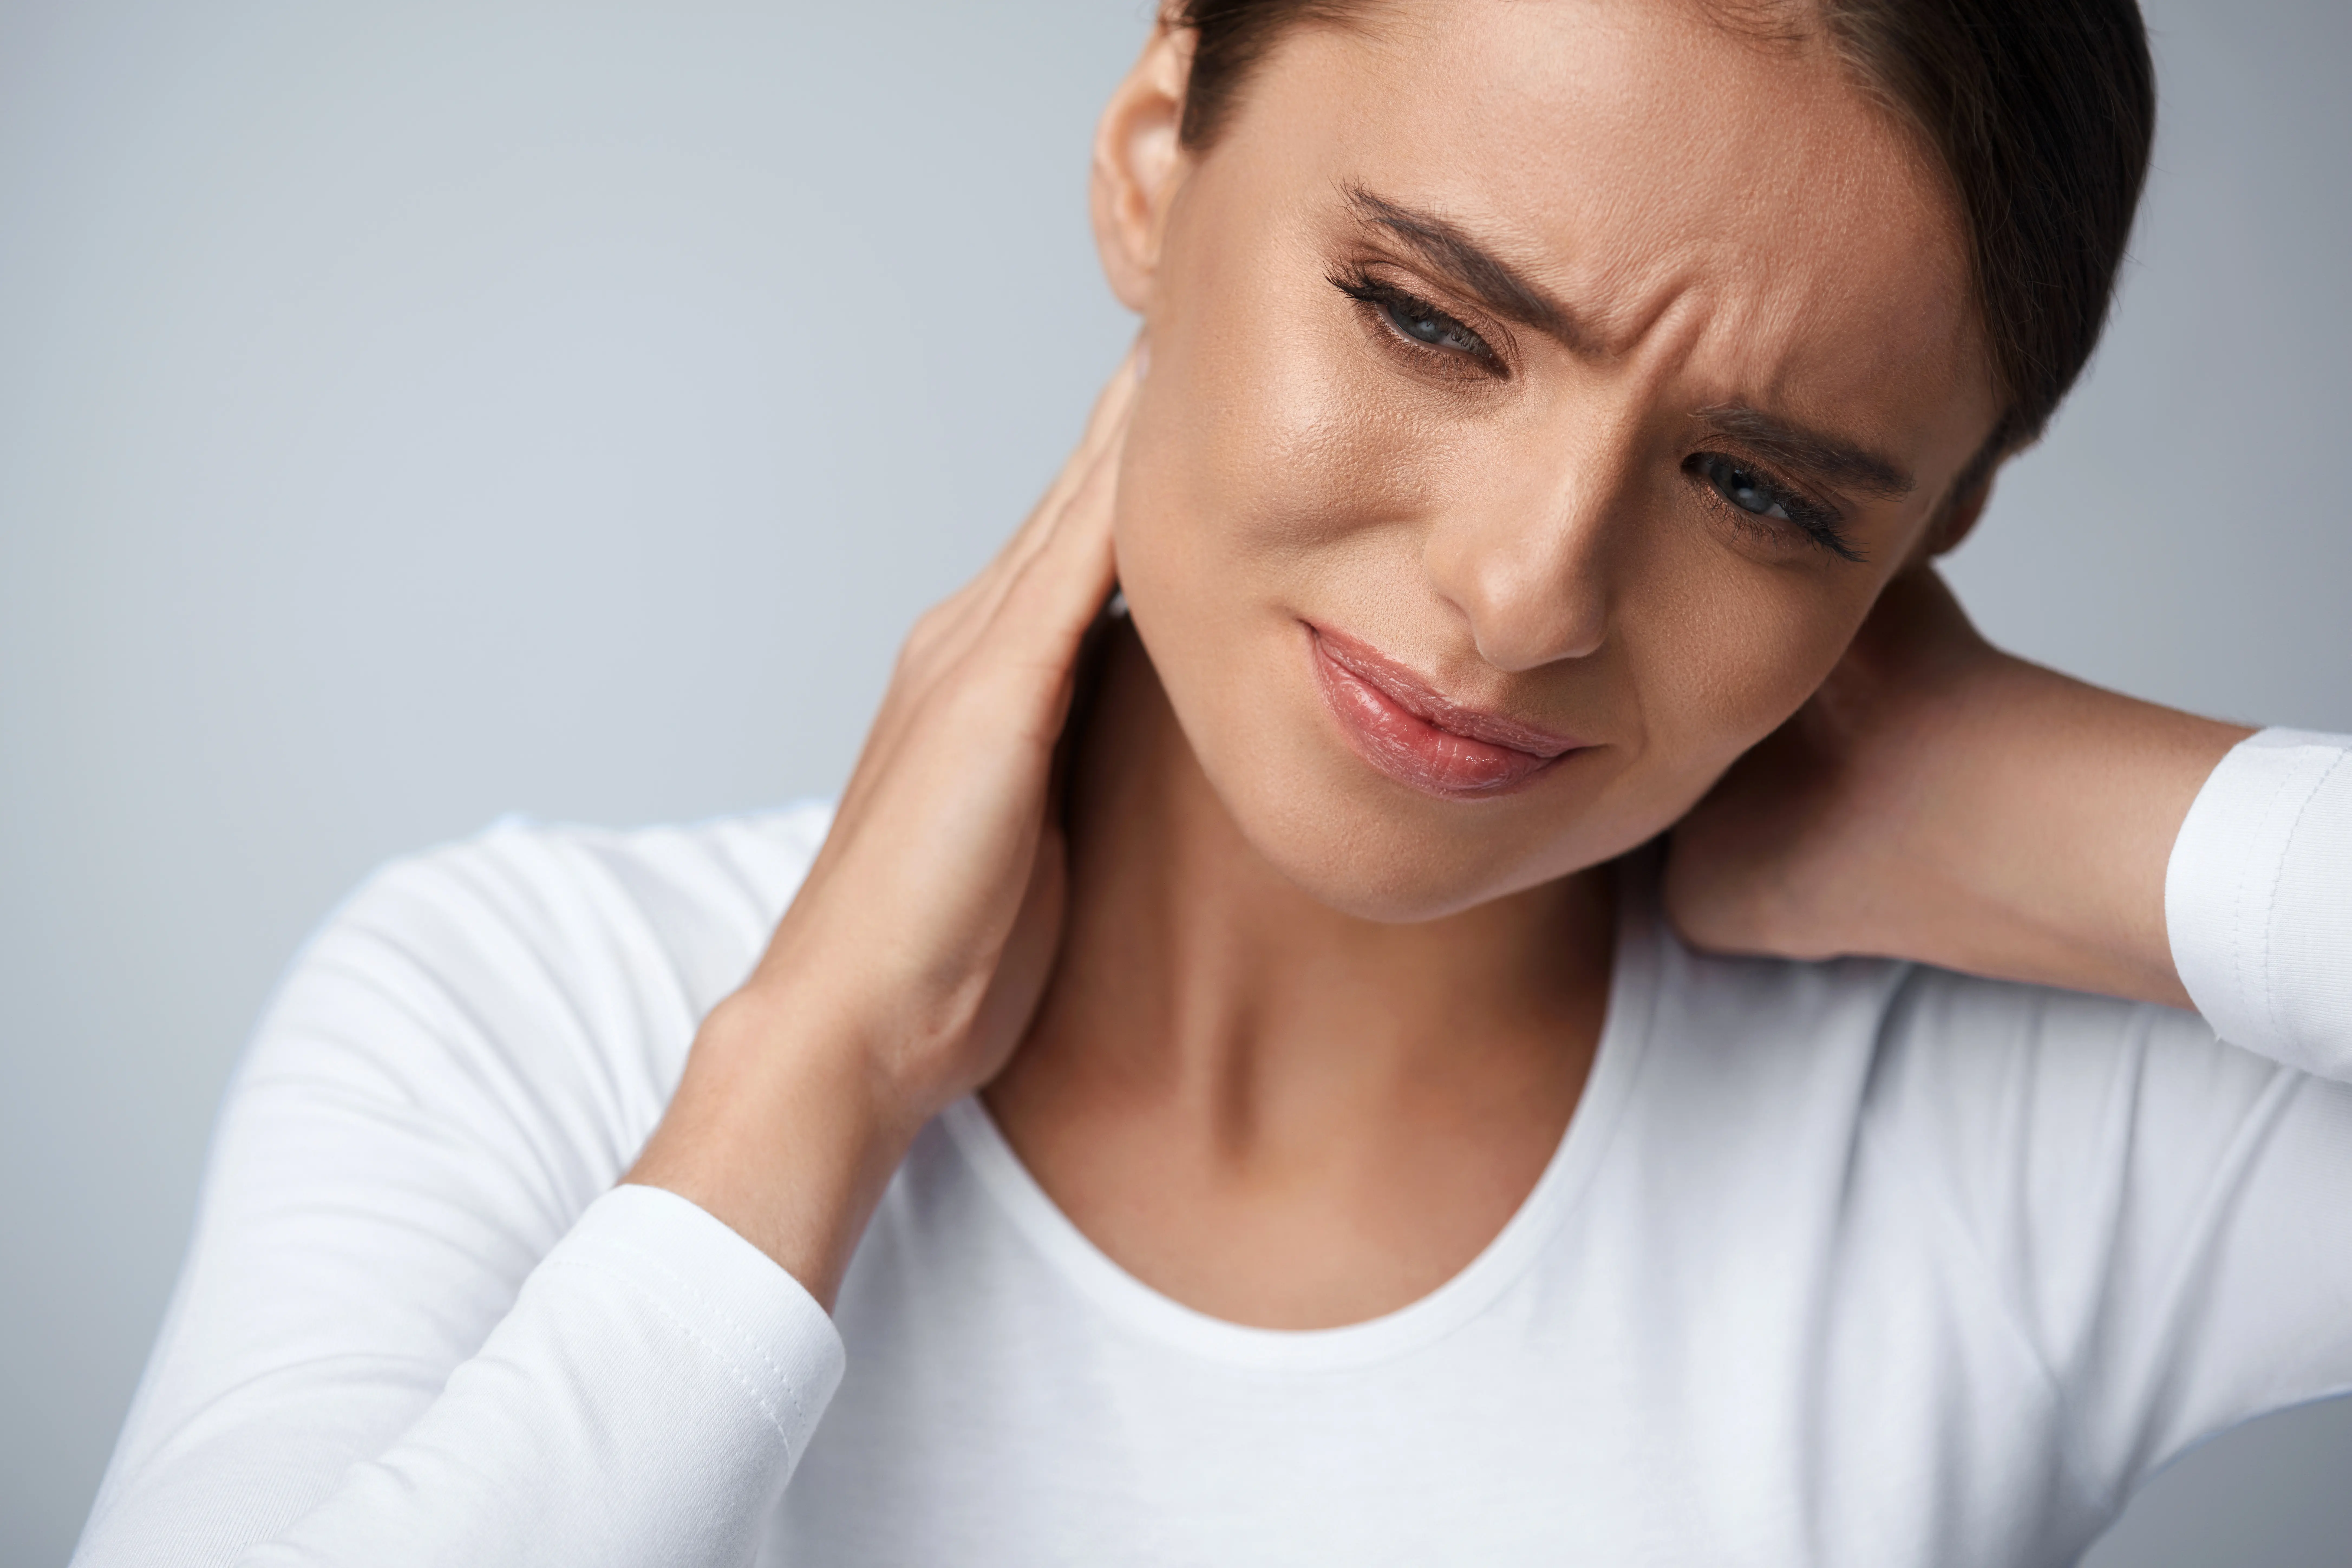 Is it Chronic or Acute Pain?